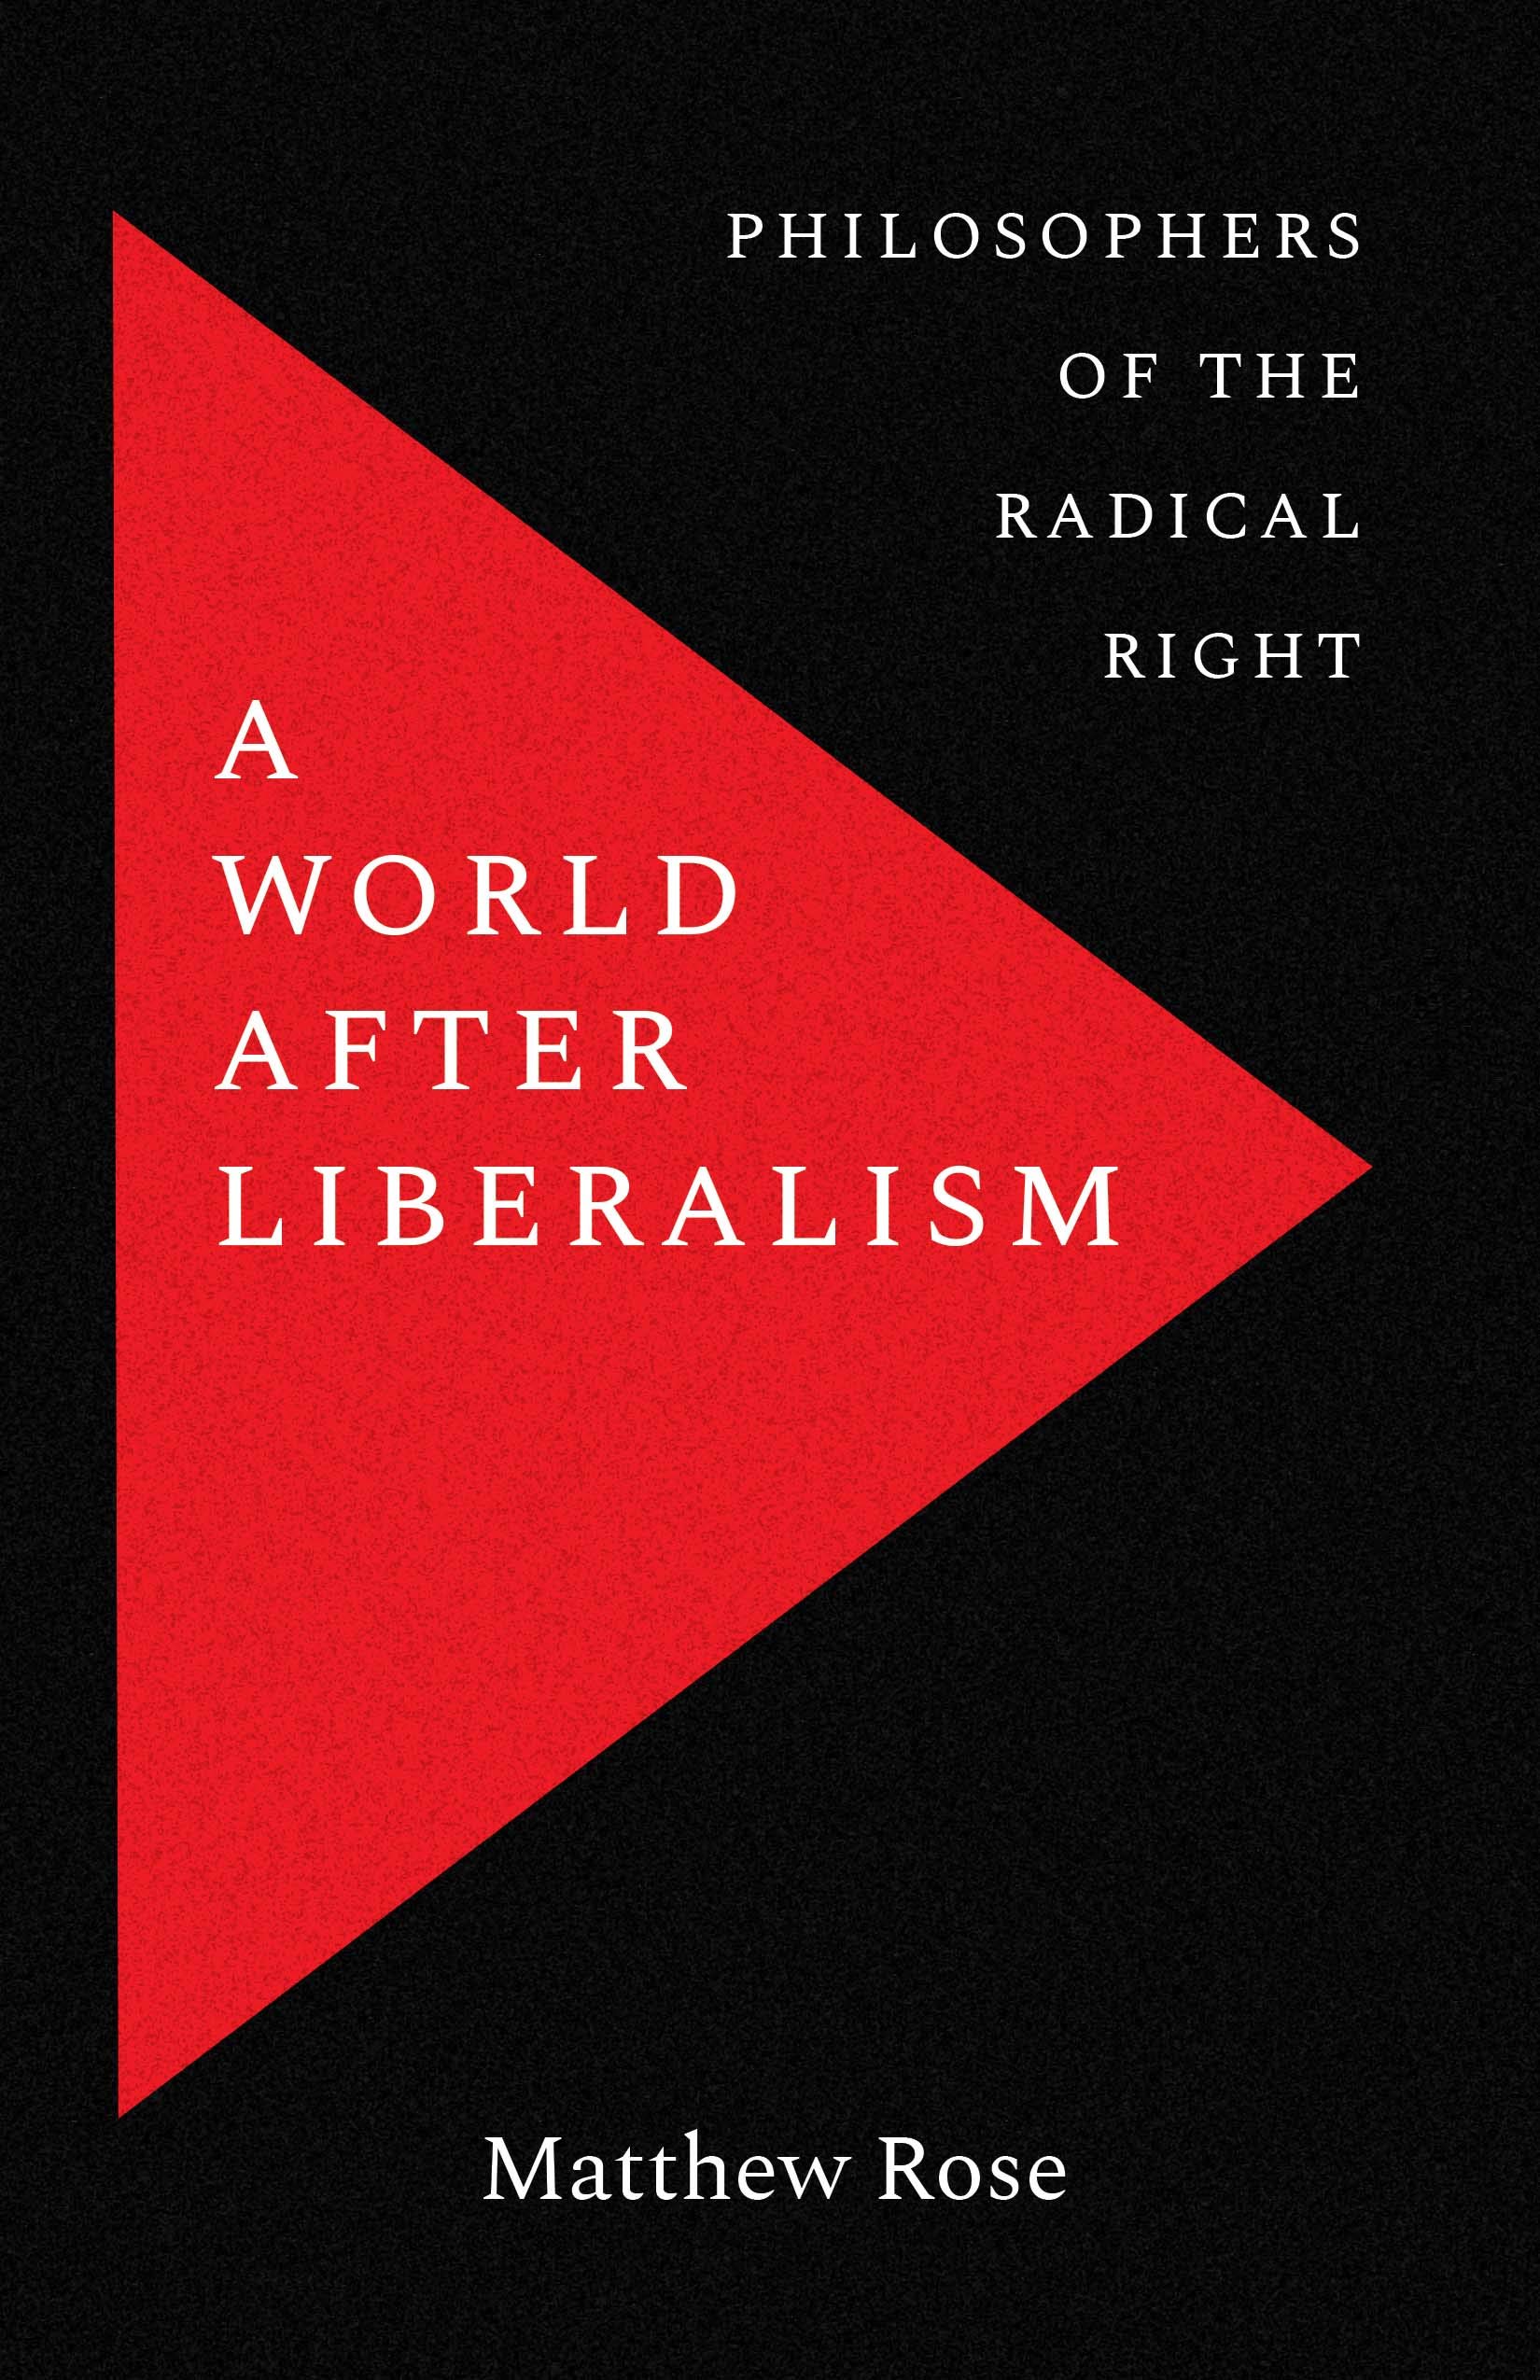 A World After Liberalism: Philosophers of the Radical Right